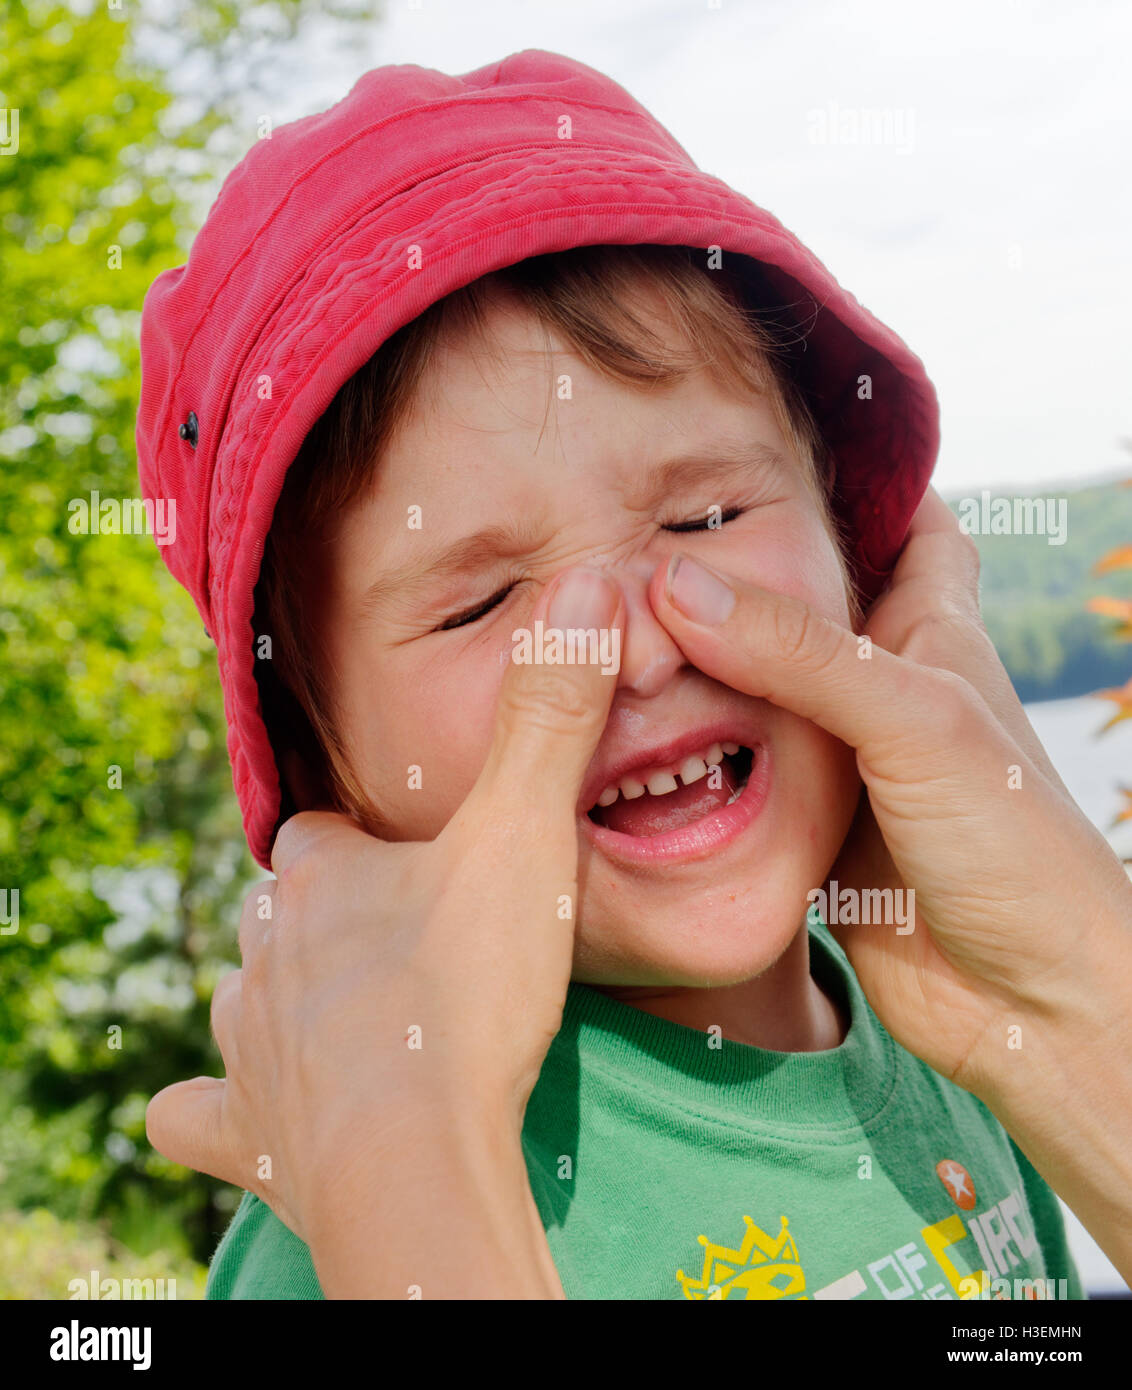 A young boy (4 yrs old) reluctantly having suncream put on his face by his mum Stock Photo